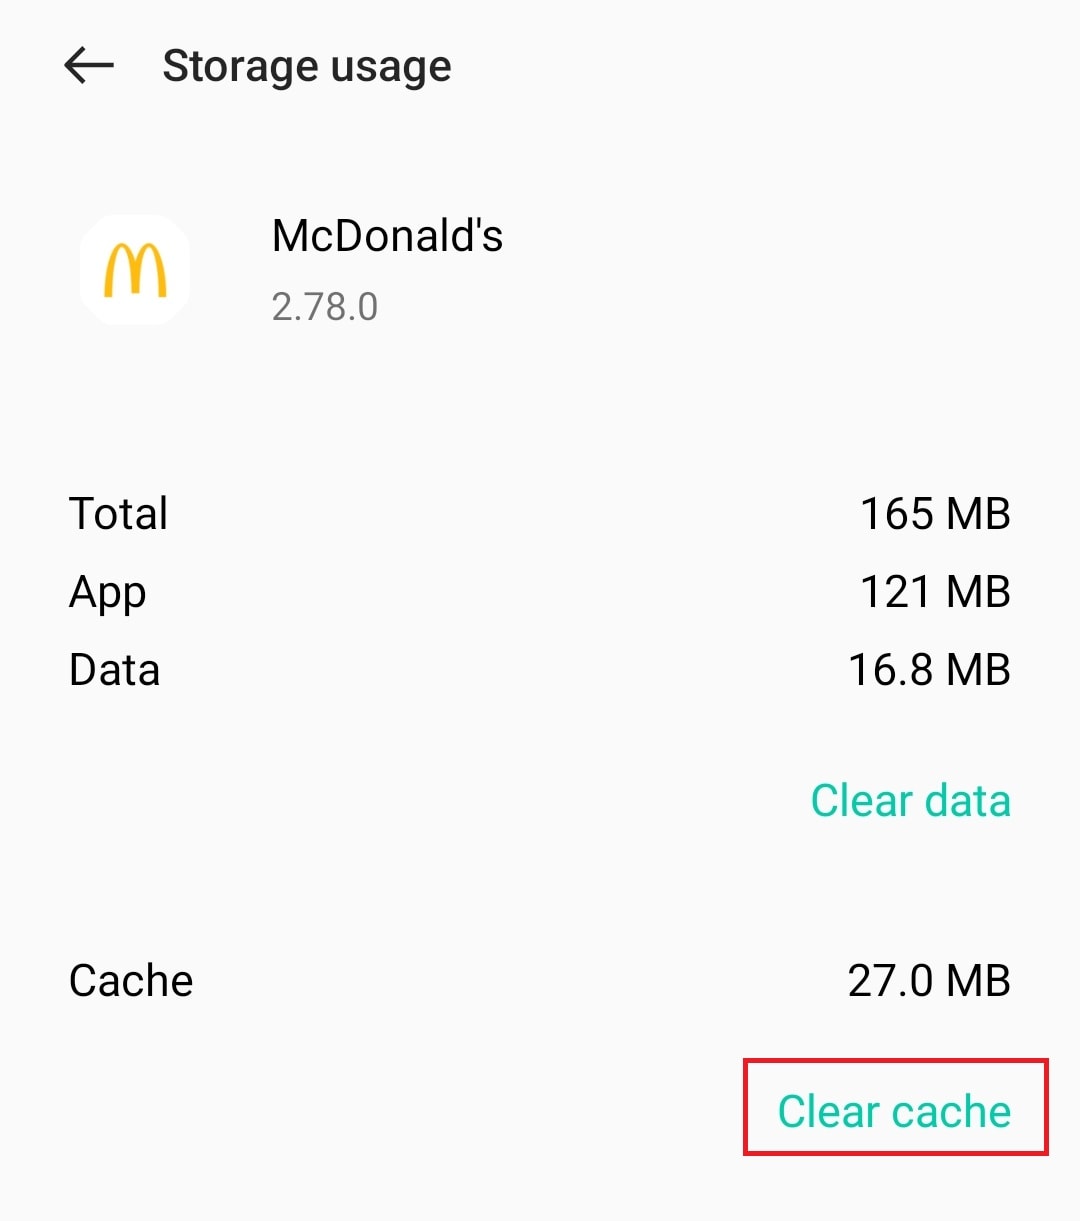 Tap on Clear cache